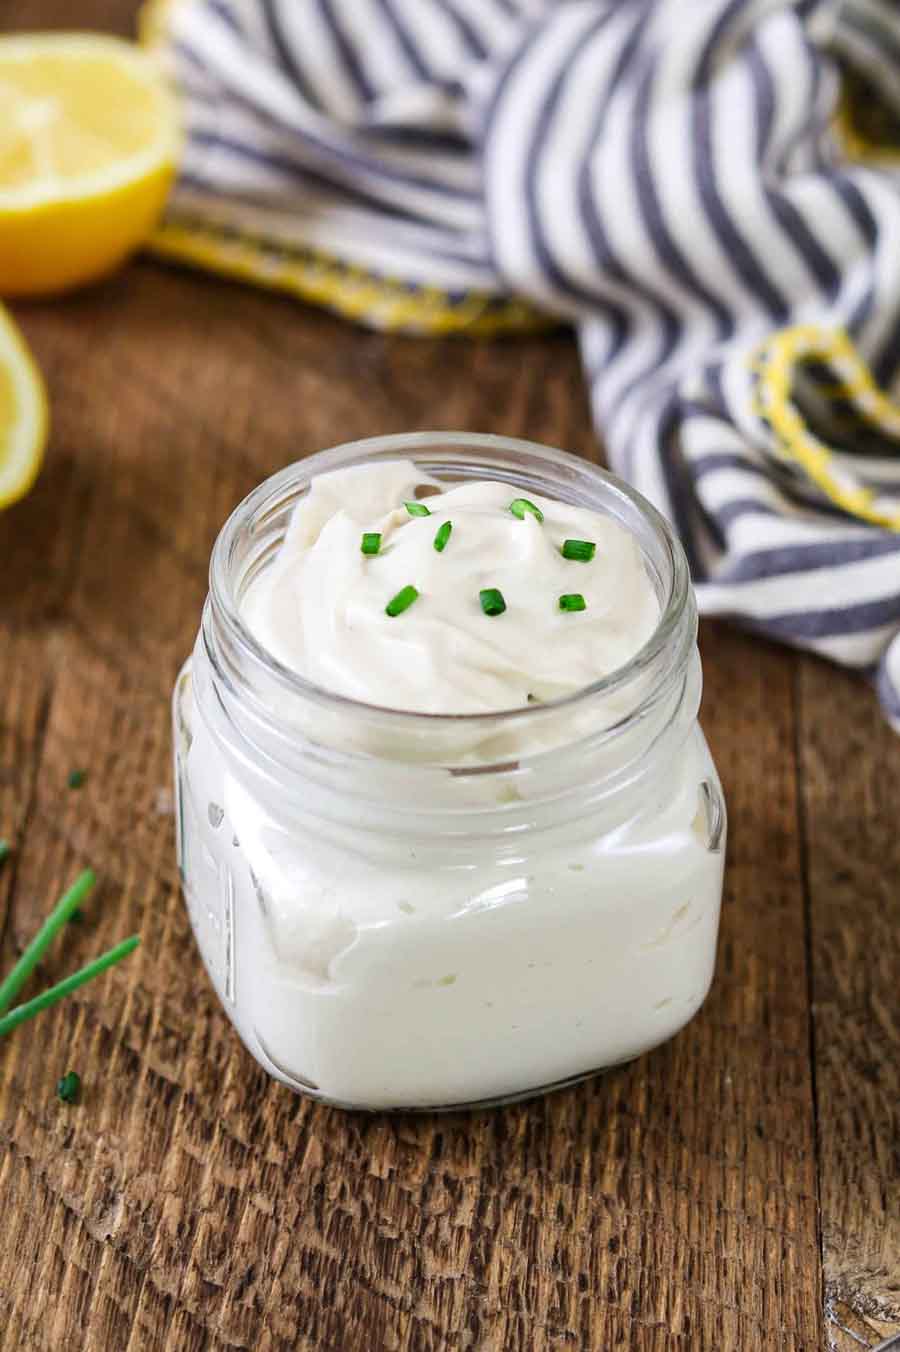 Jar of sour cream on table